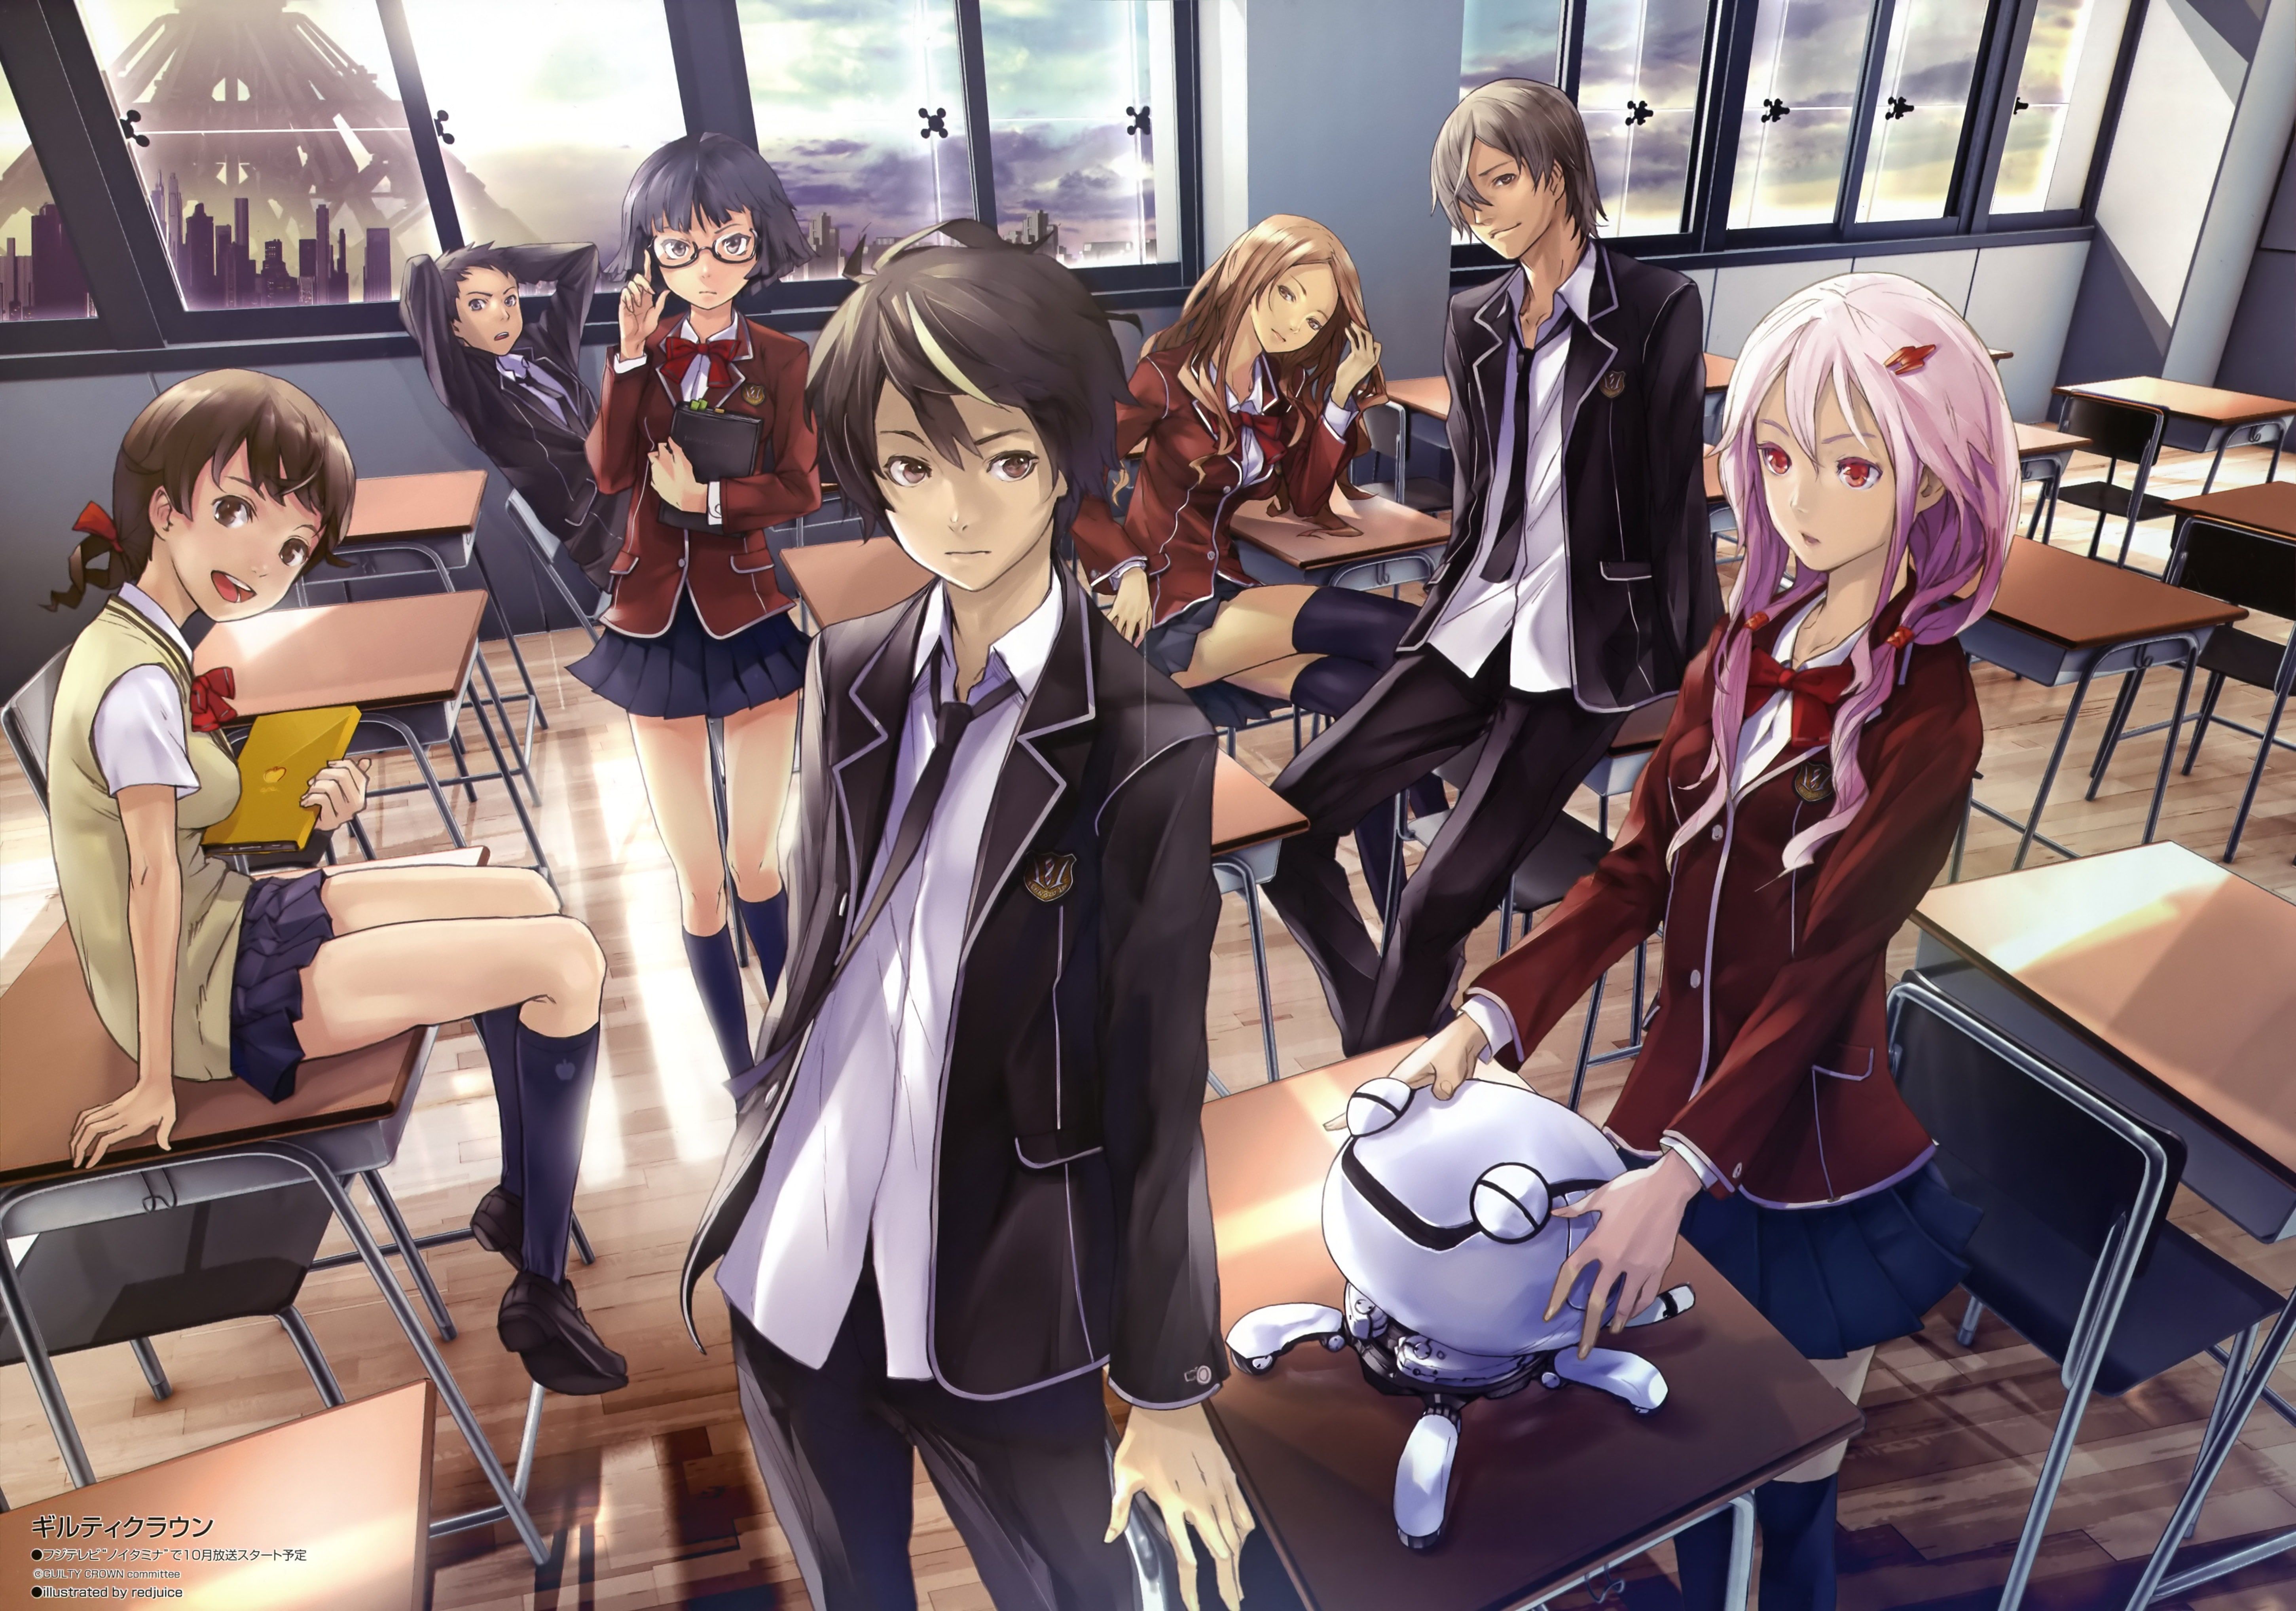 Wallpaper Anime Guilty Crown Hd For Android